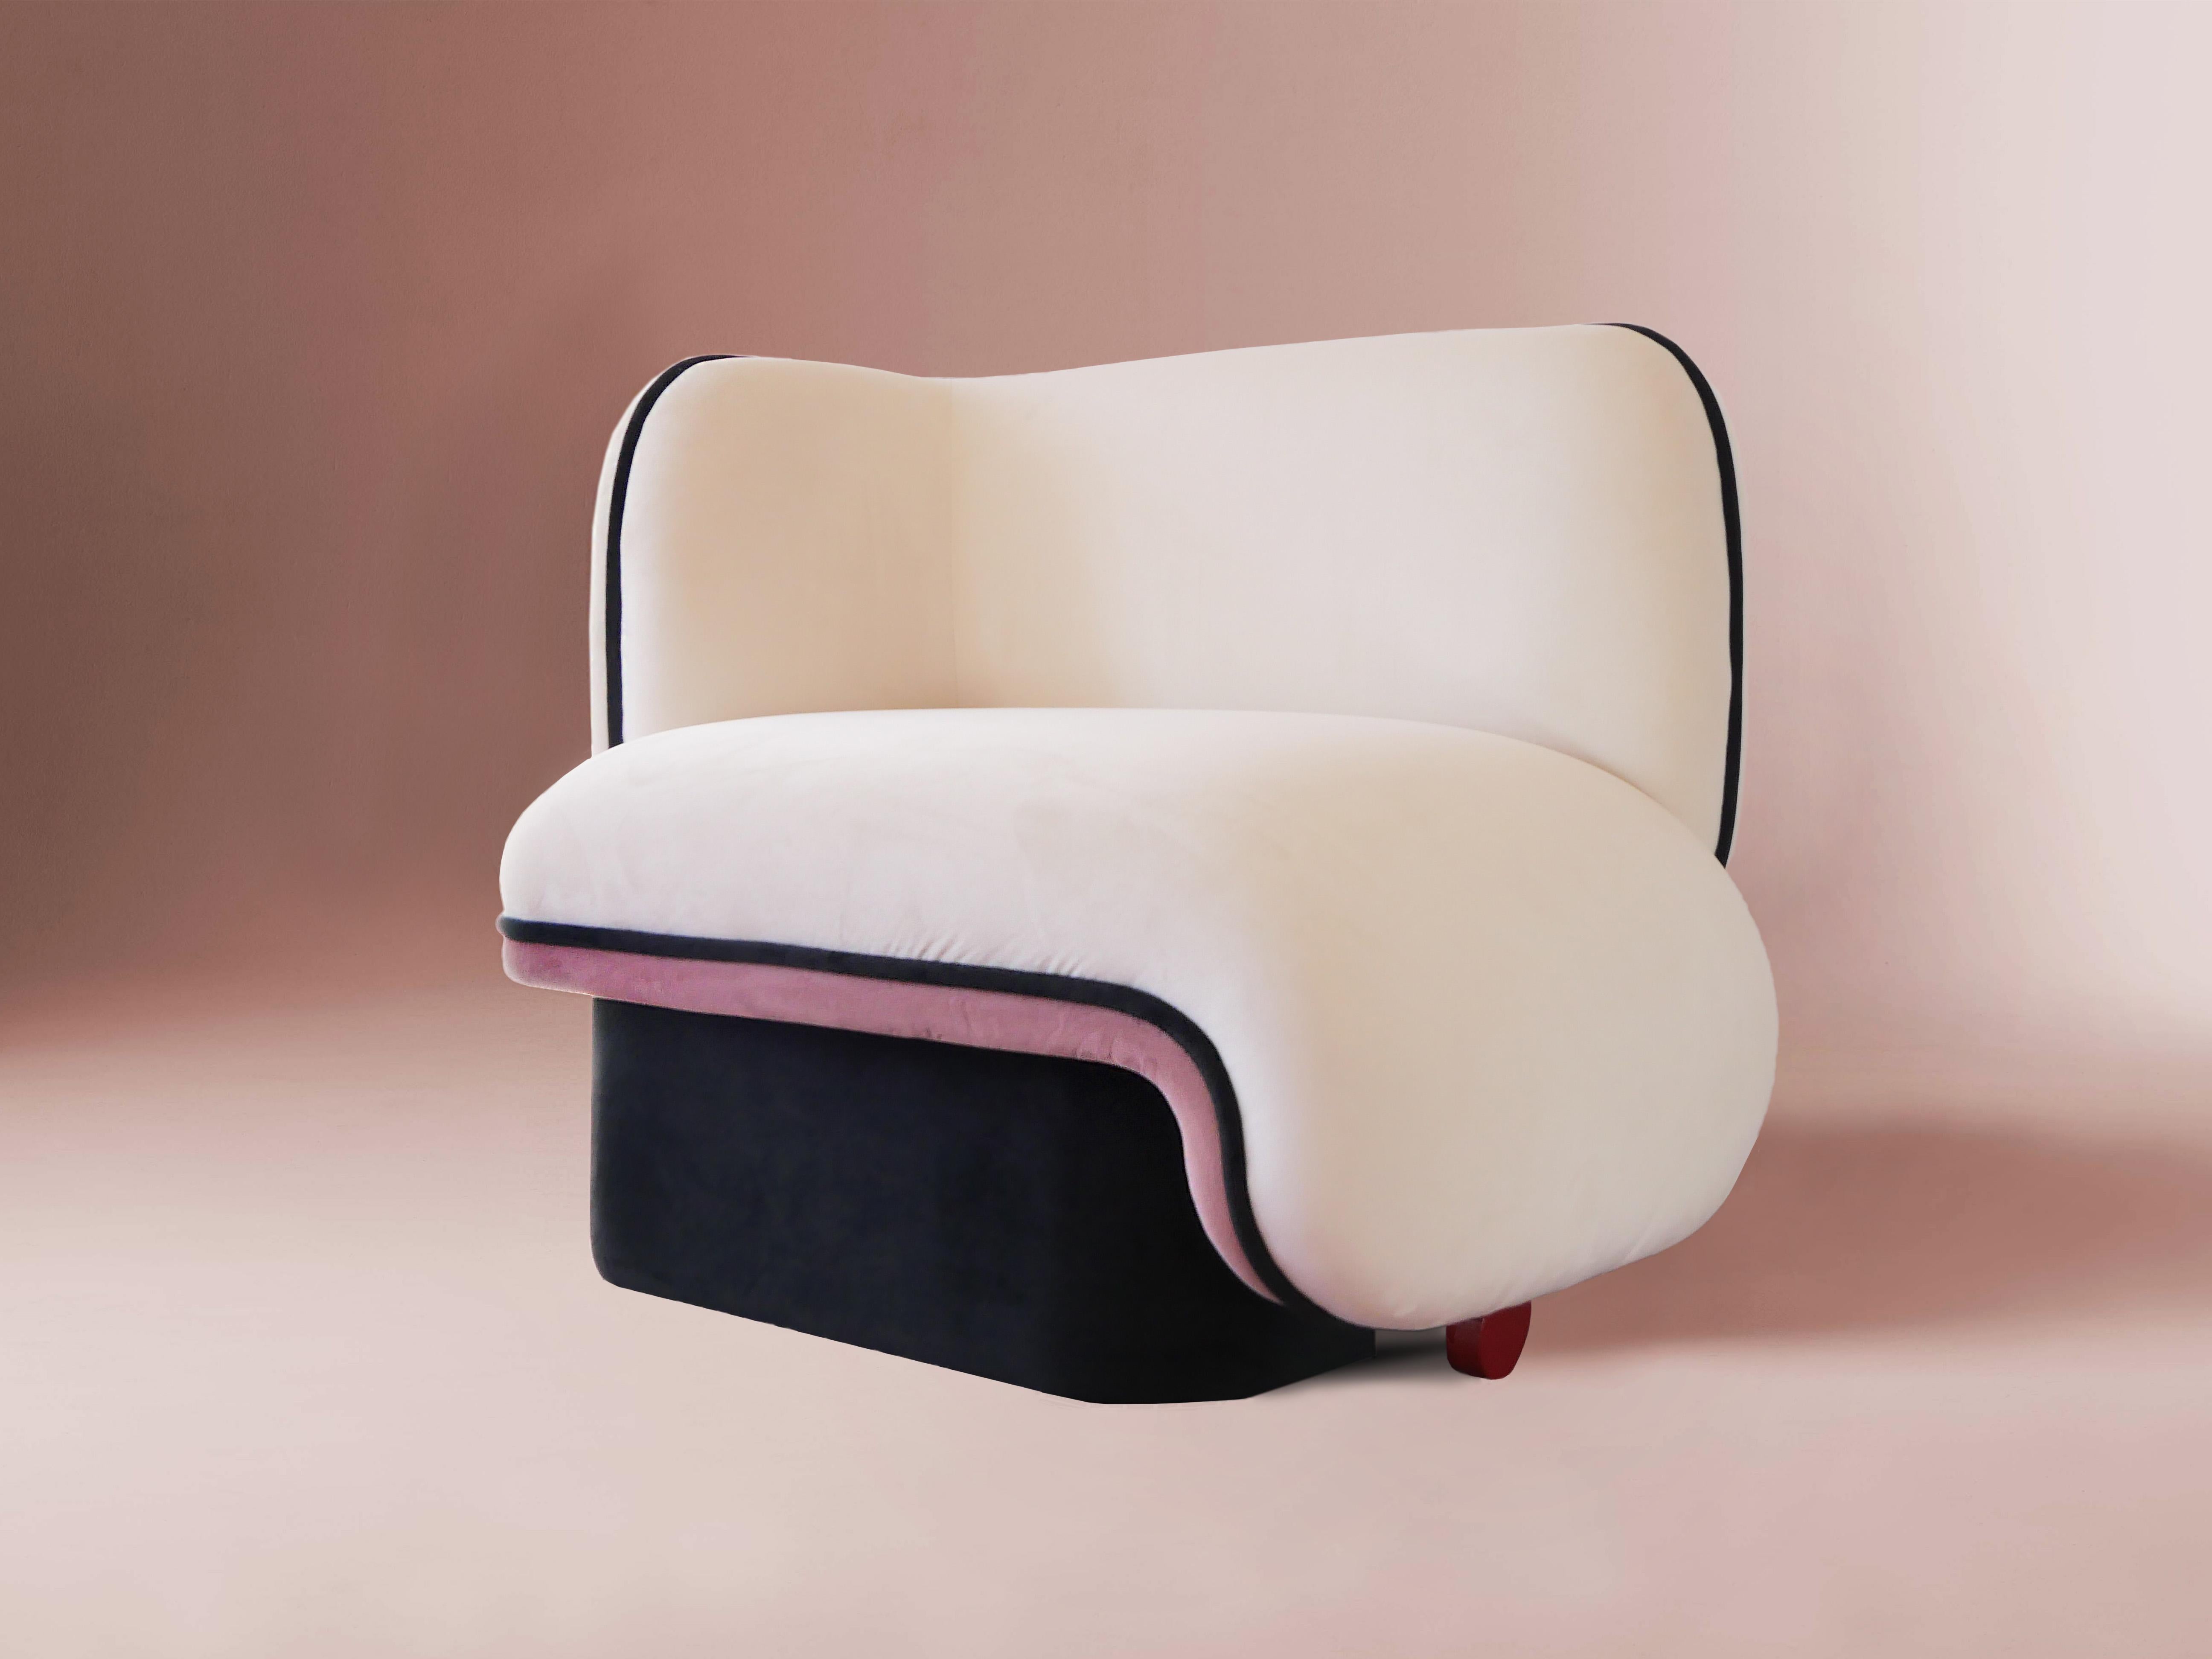 Elefante is recognized as the most charismatic armchair of our collection. Designed by Sergio Prieto with strong inspiration by the rounded shapes of an elephant, as the name reflects. The fusion of materials and textures makes this piece extremely